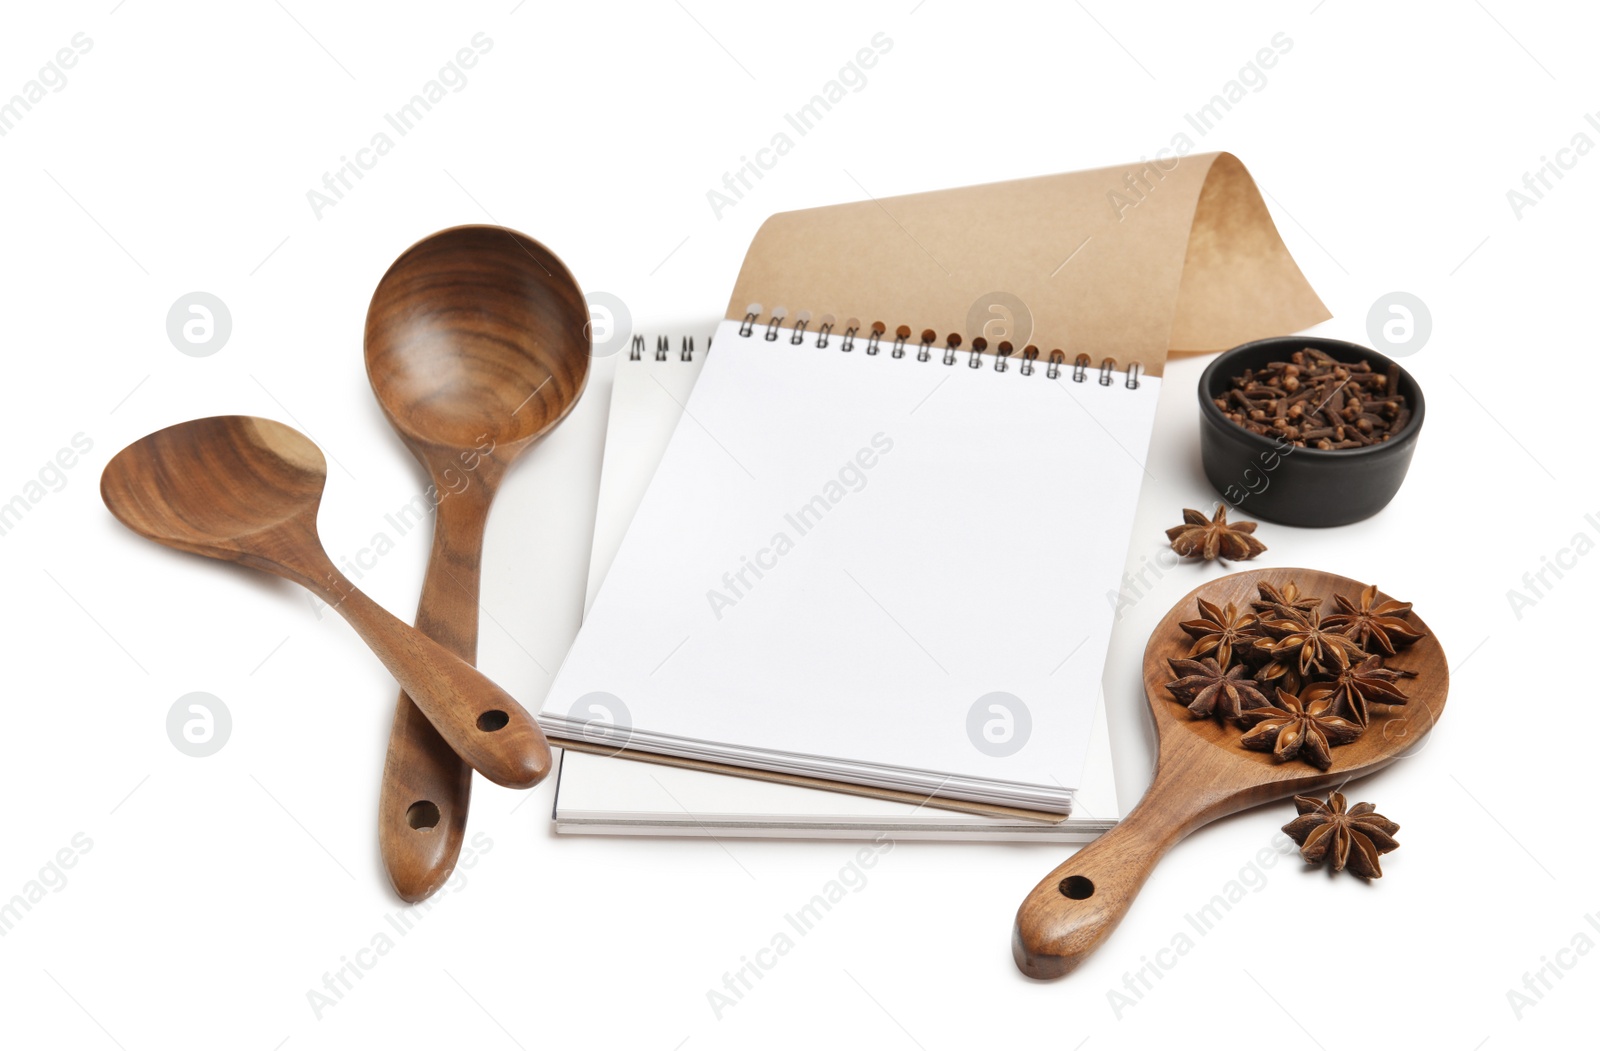 Photo of Blank recipe book, spices and wooden utensils on white background. Space for text